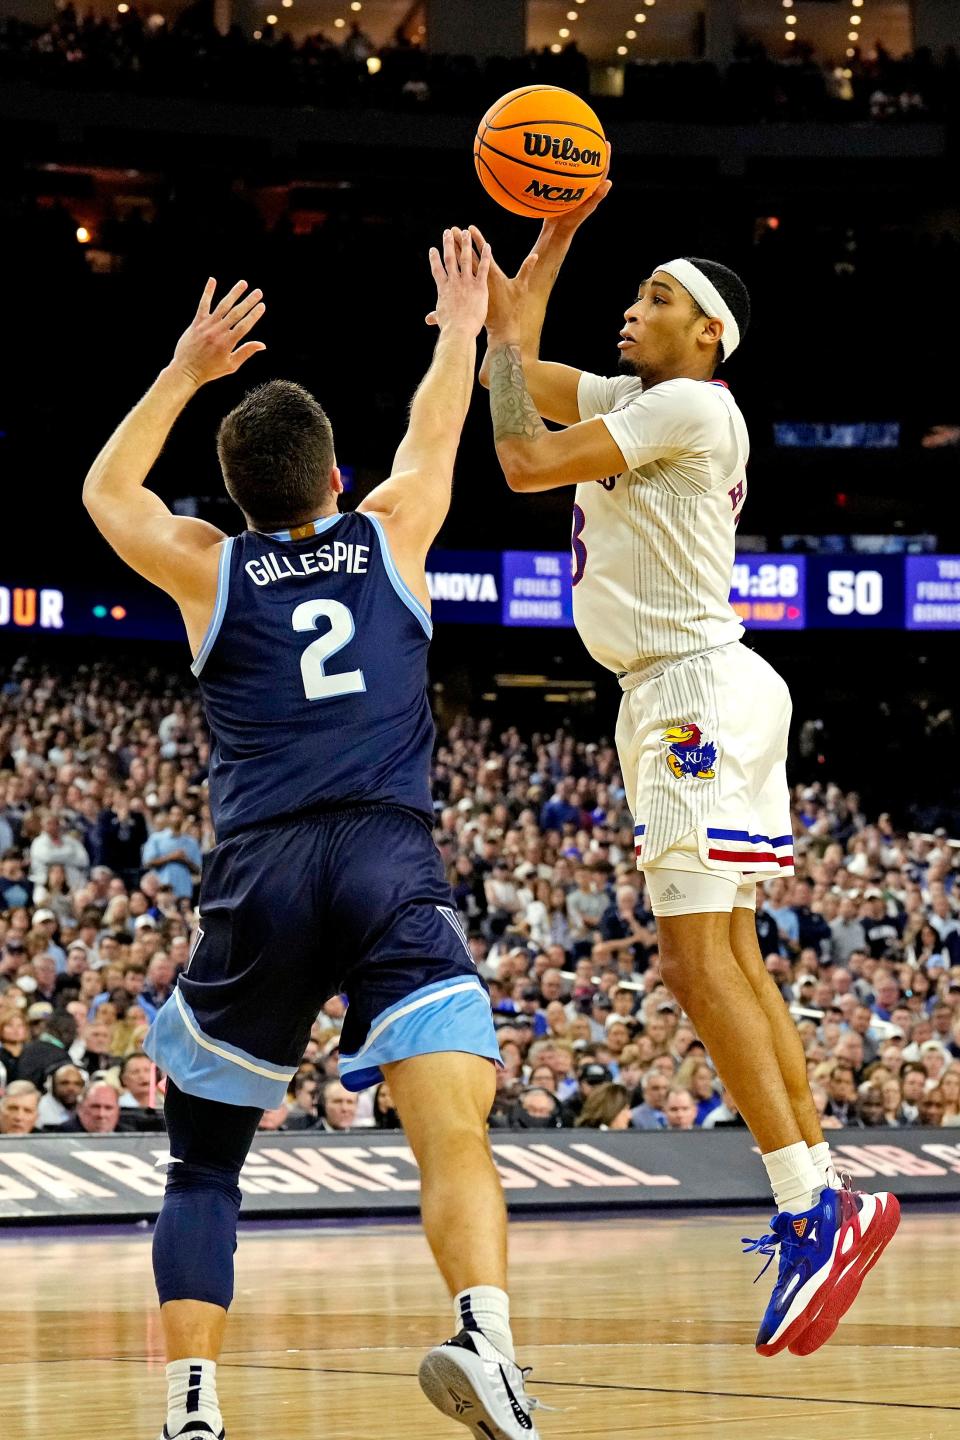 Kansas guard Dajuan Harris Jr. takes a shot against Villanova guard Collin Gillespie during the second half of a Final Four game at the NCAA tournament this past season on April 2, 2022 in New Orleans.